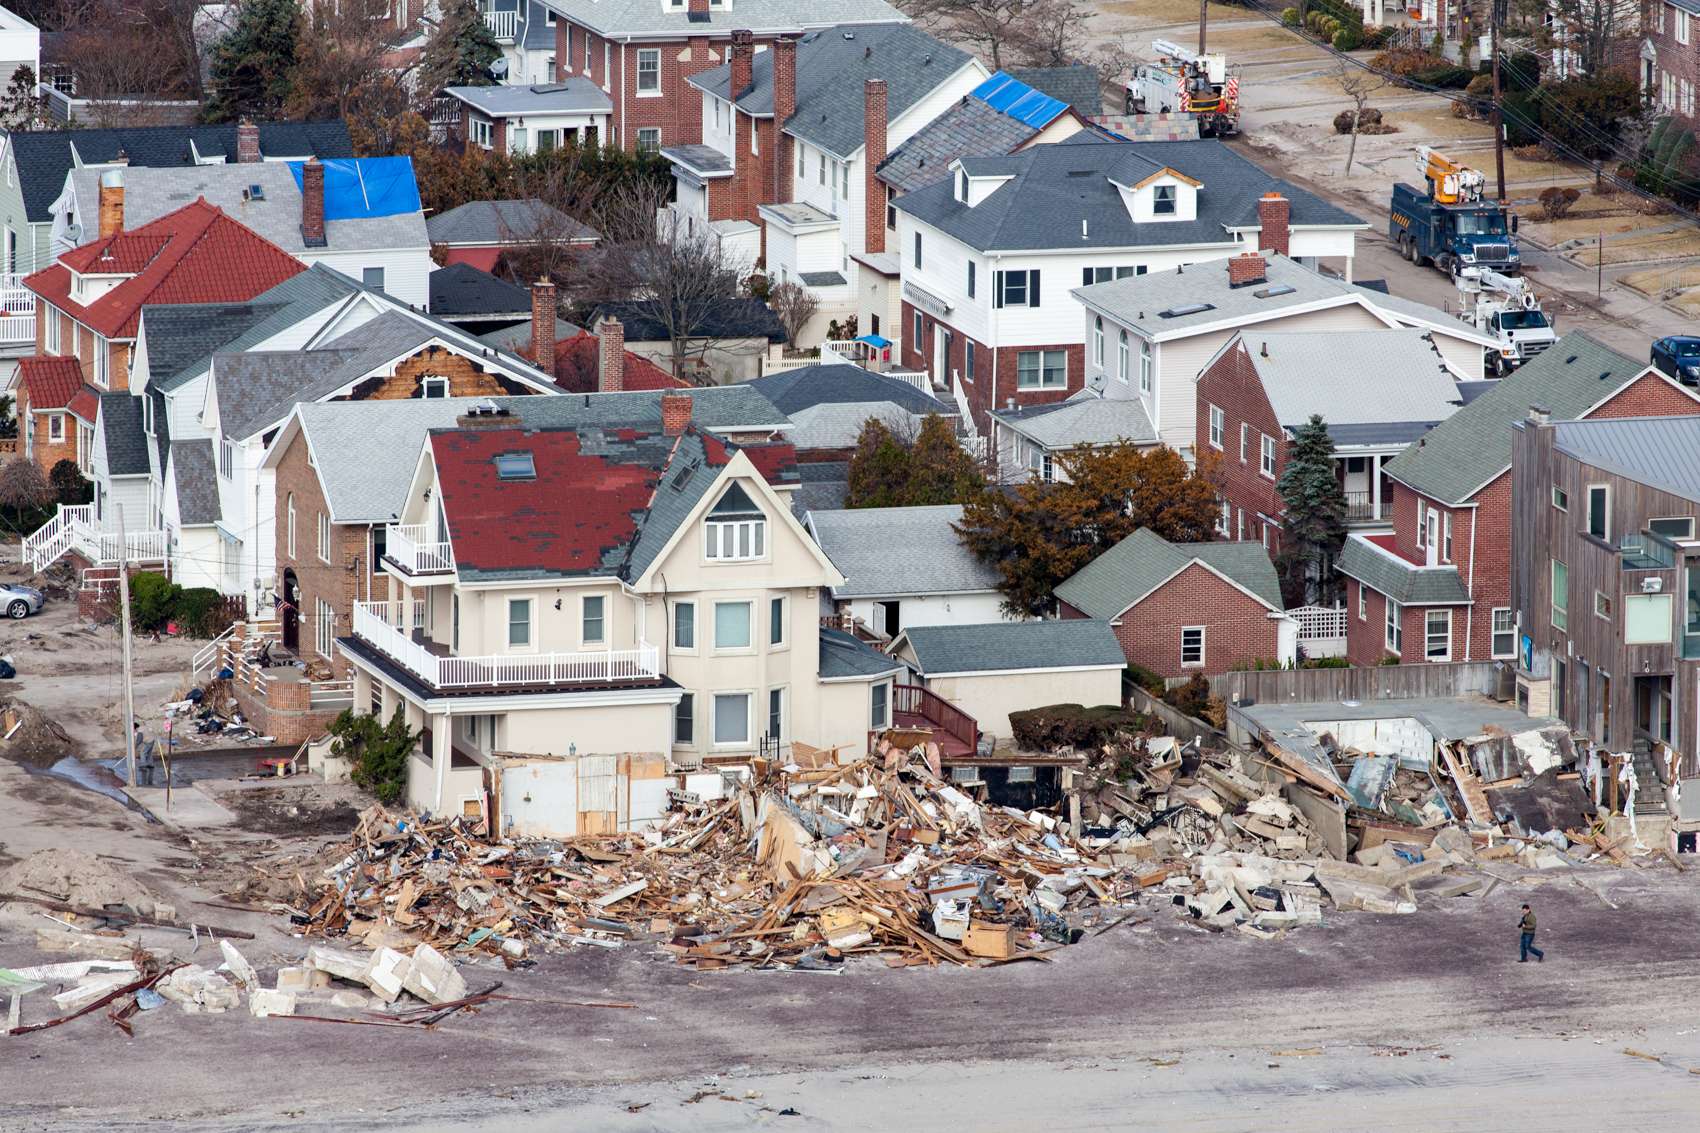 Front row ocean housing completely destroyed by Hurricane Sandy. (Note the roof damage buildigns.)